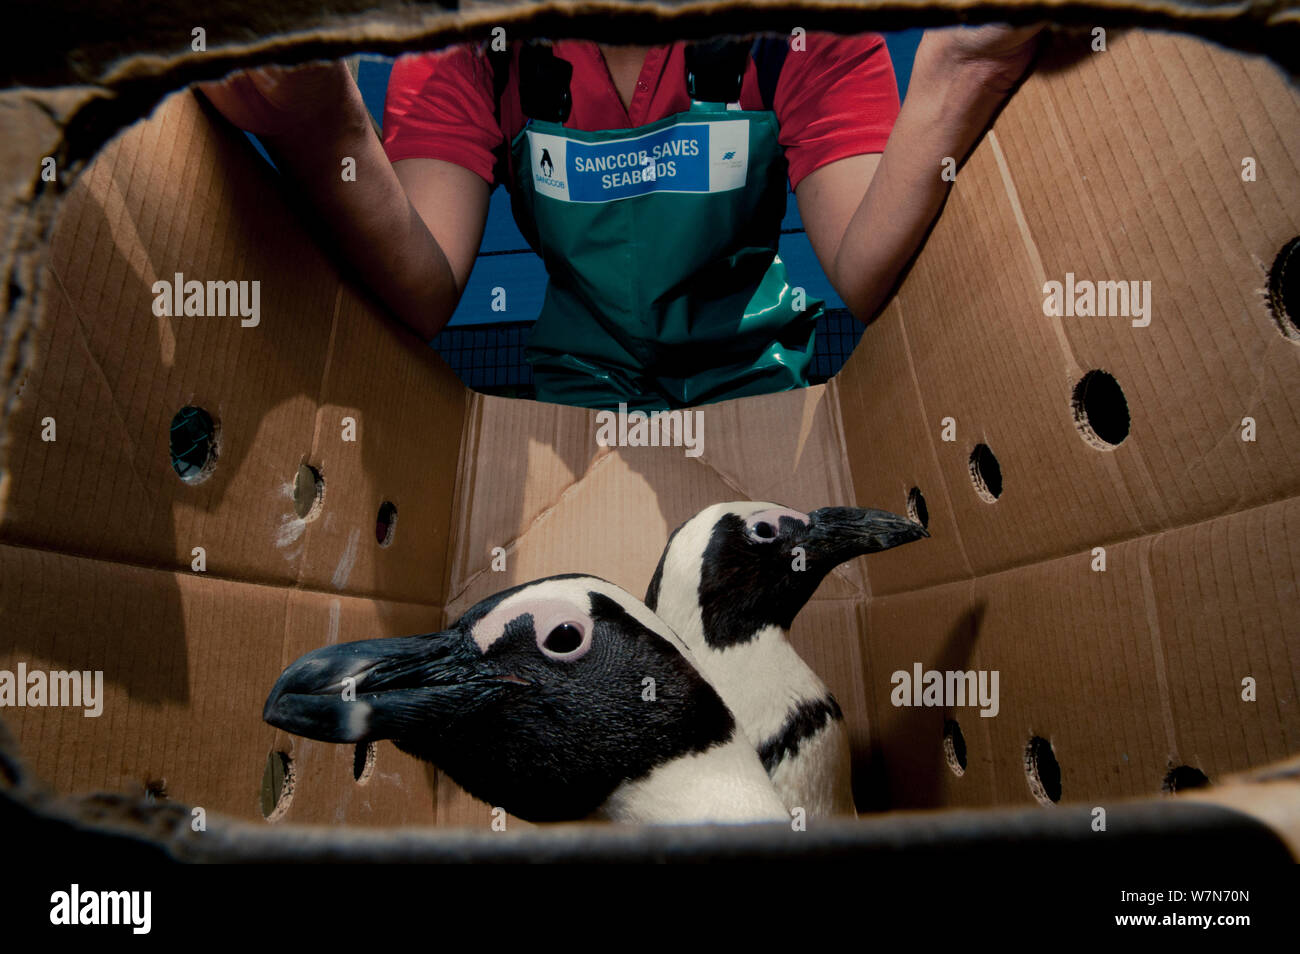 Black footed penguins (Spheniscus demersus) in box ready to be released in sea near Robben Island in Table Bay after rehabilitation at Southern African Foundation for the Conservation of Coastal Birds (SANCCOB) Cape Town, South Africa Stock Photo